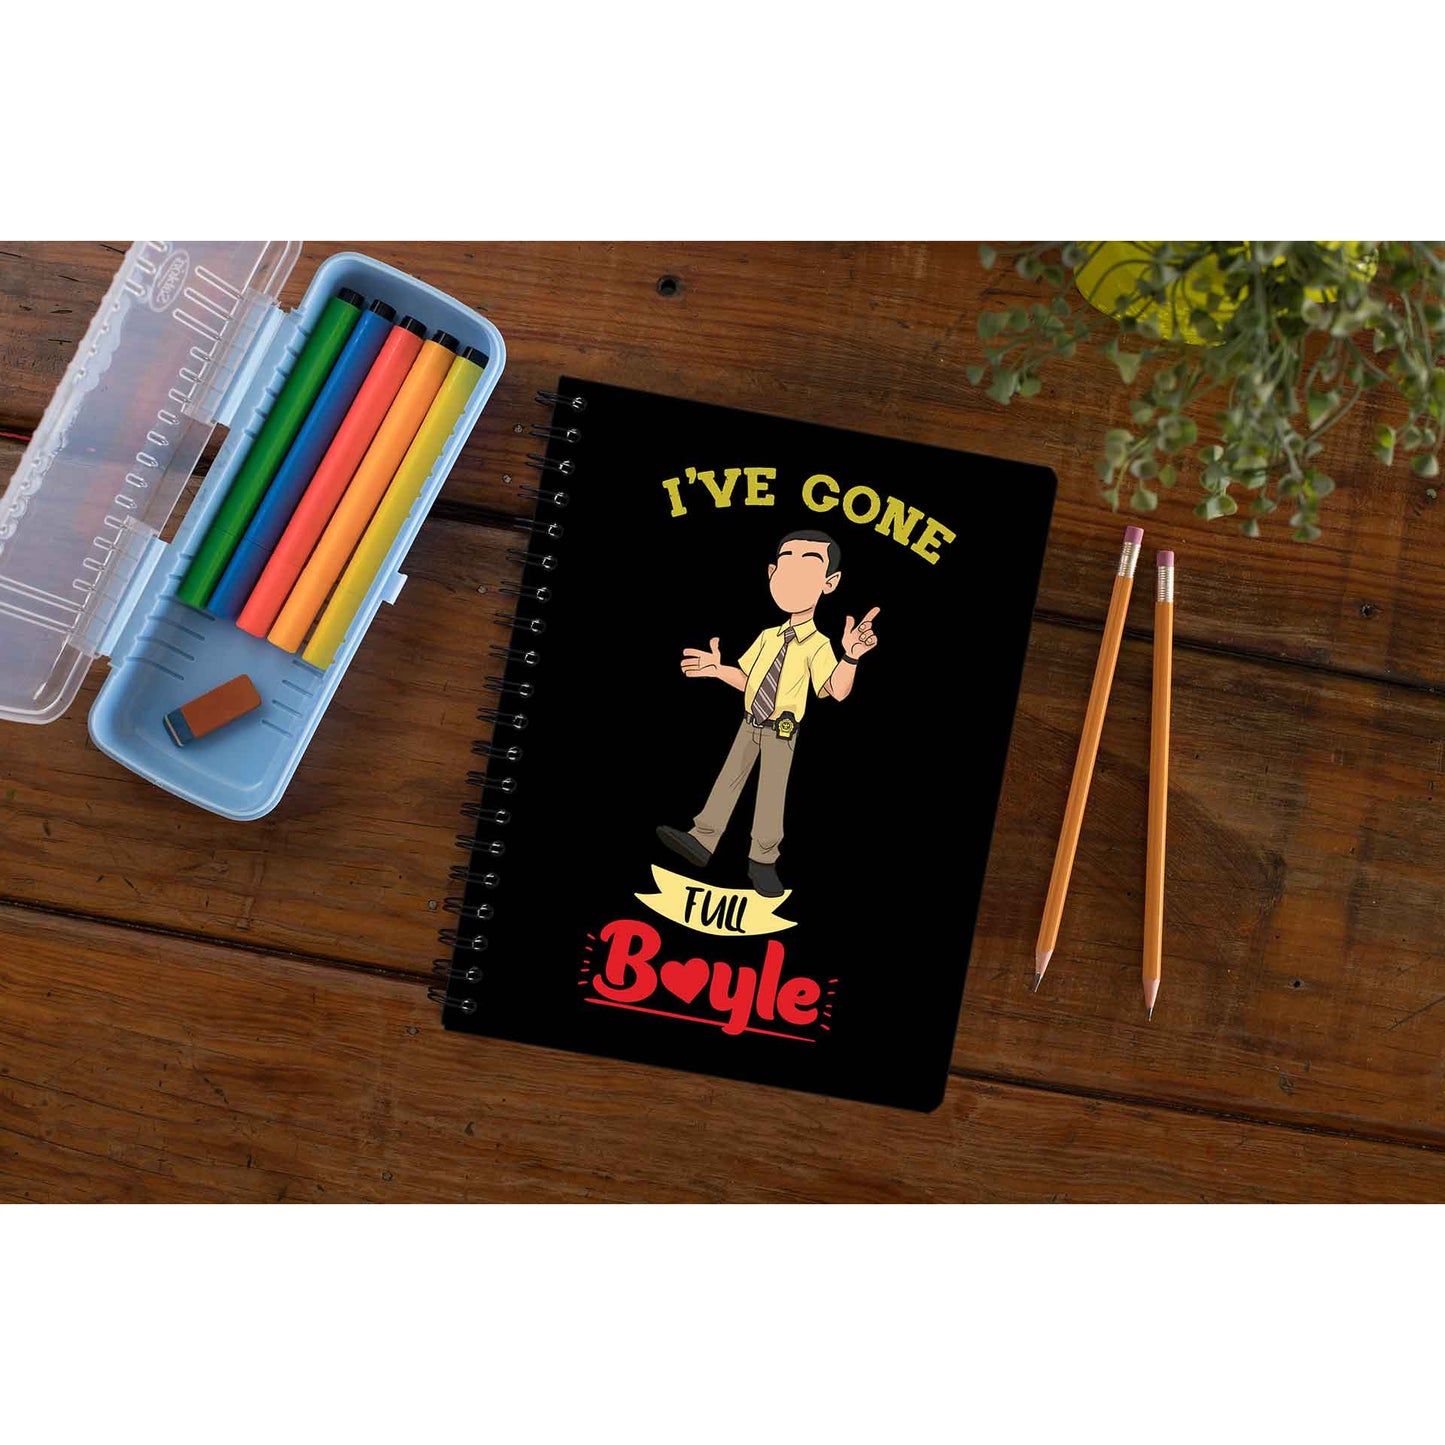 brooklyn nine-nine gone full boyle notebook notepad diary buy online india the banyan tee tbt unruled detective jake peralta terry charles boyle gina linetti andy samberg merchandise clothing acceessories